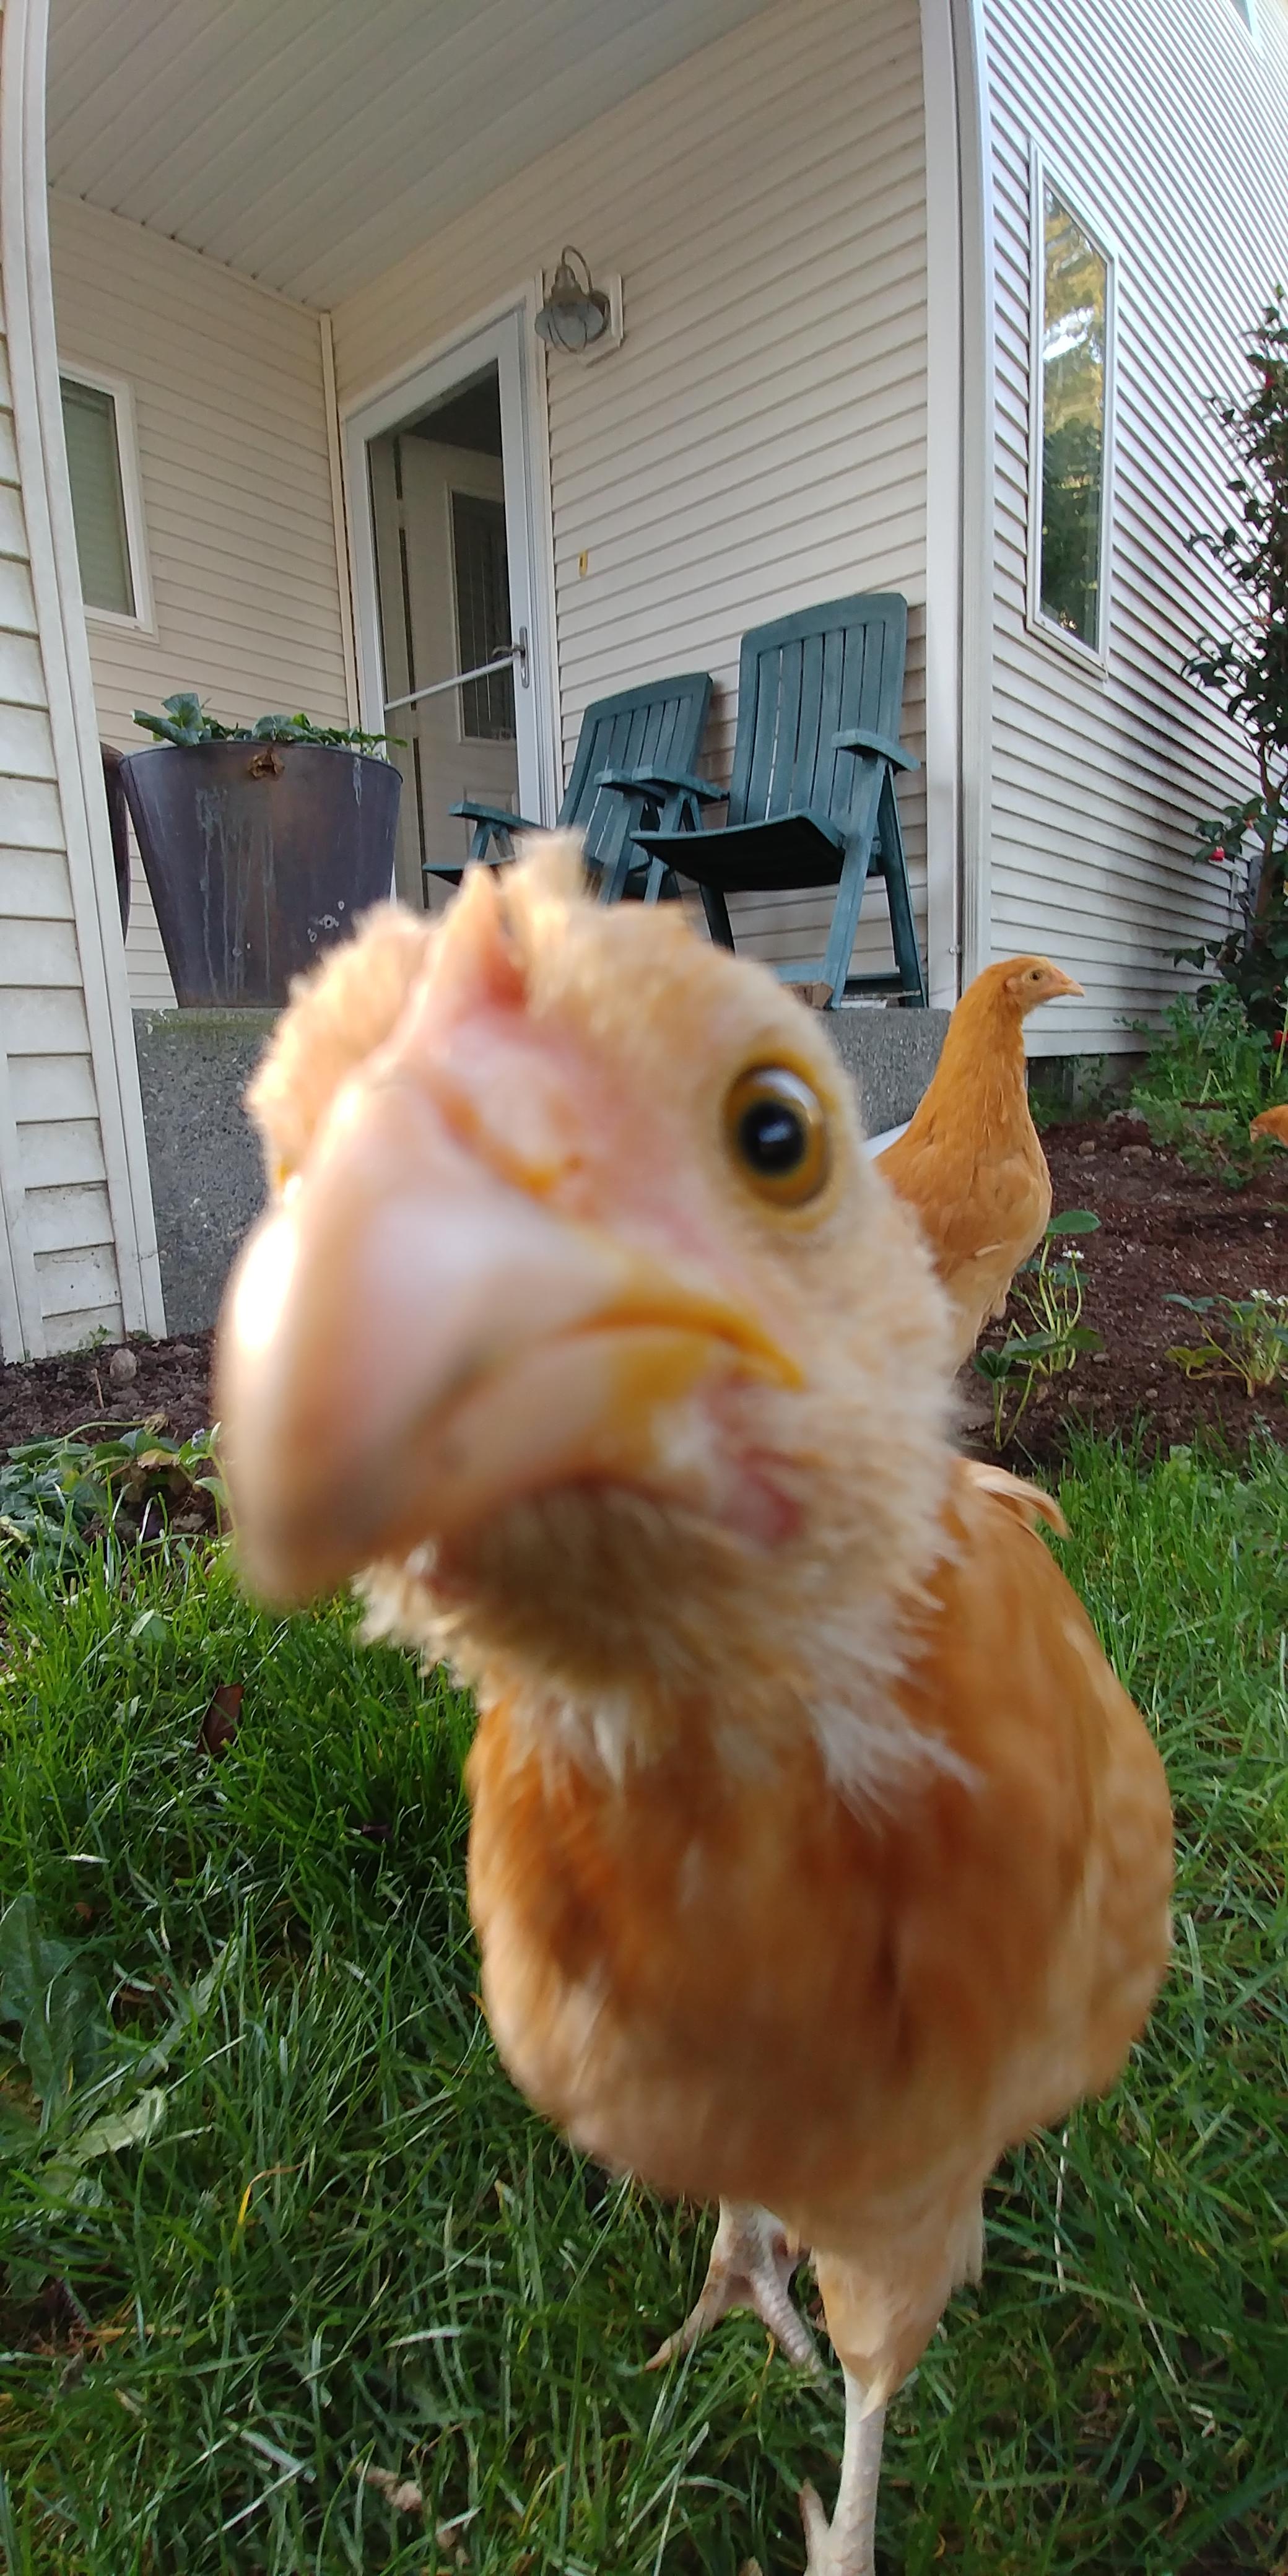 A chicken looking at the camera.